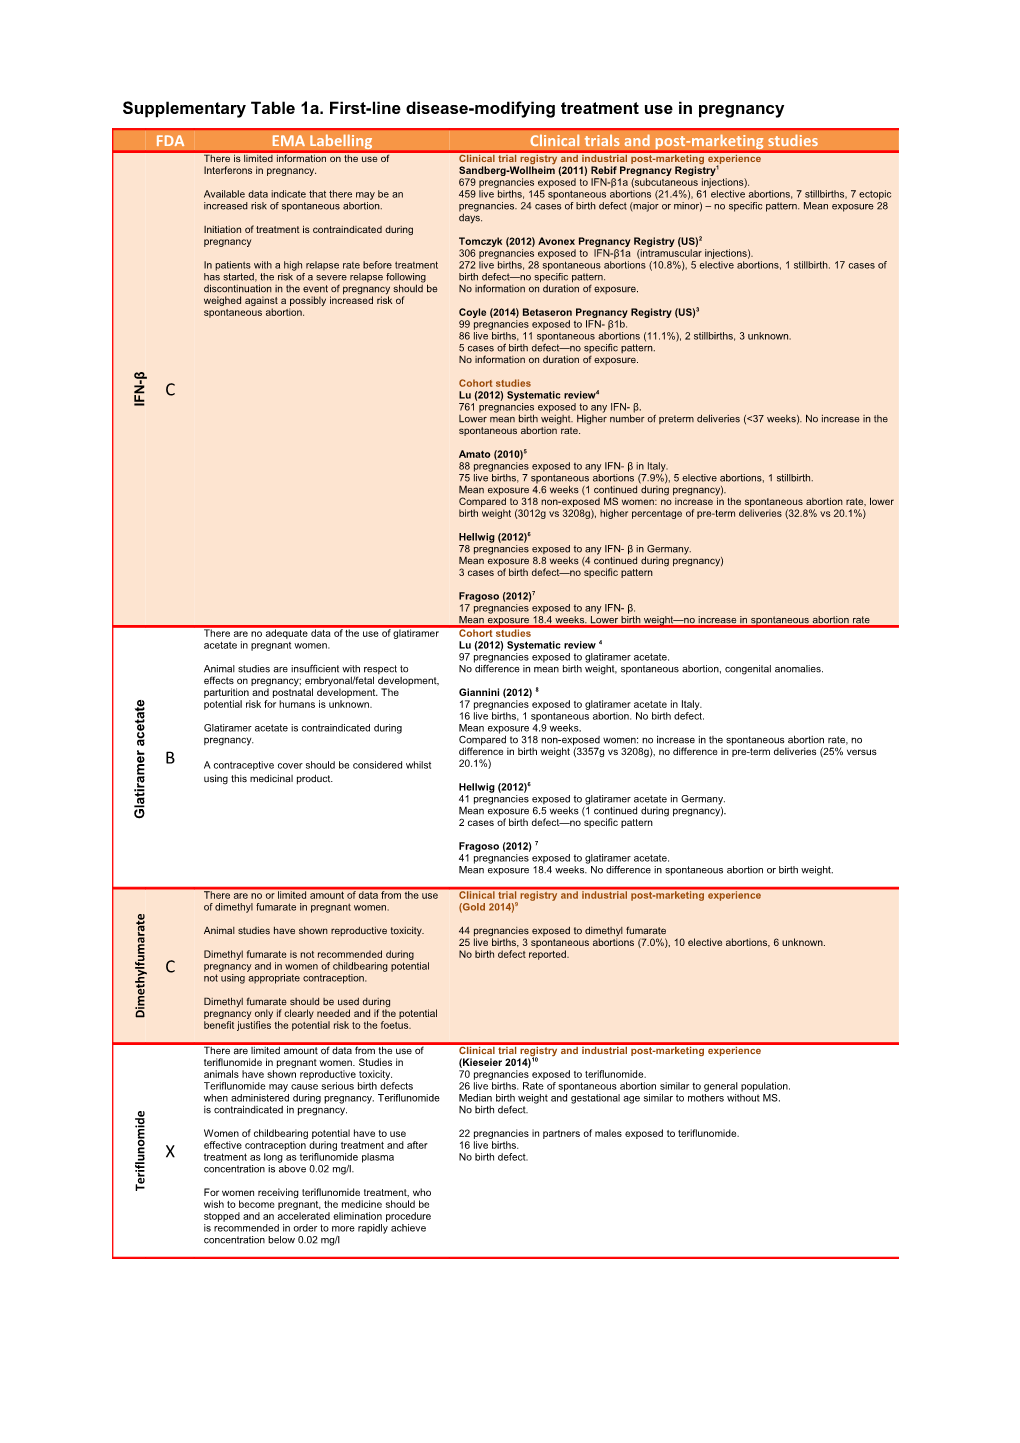 Supplementary Table 1A. First-Line Disease-Modifying Treatment Use in Pregnancy